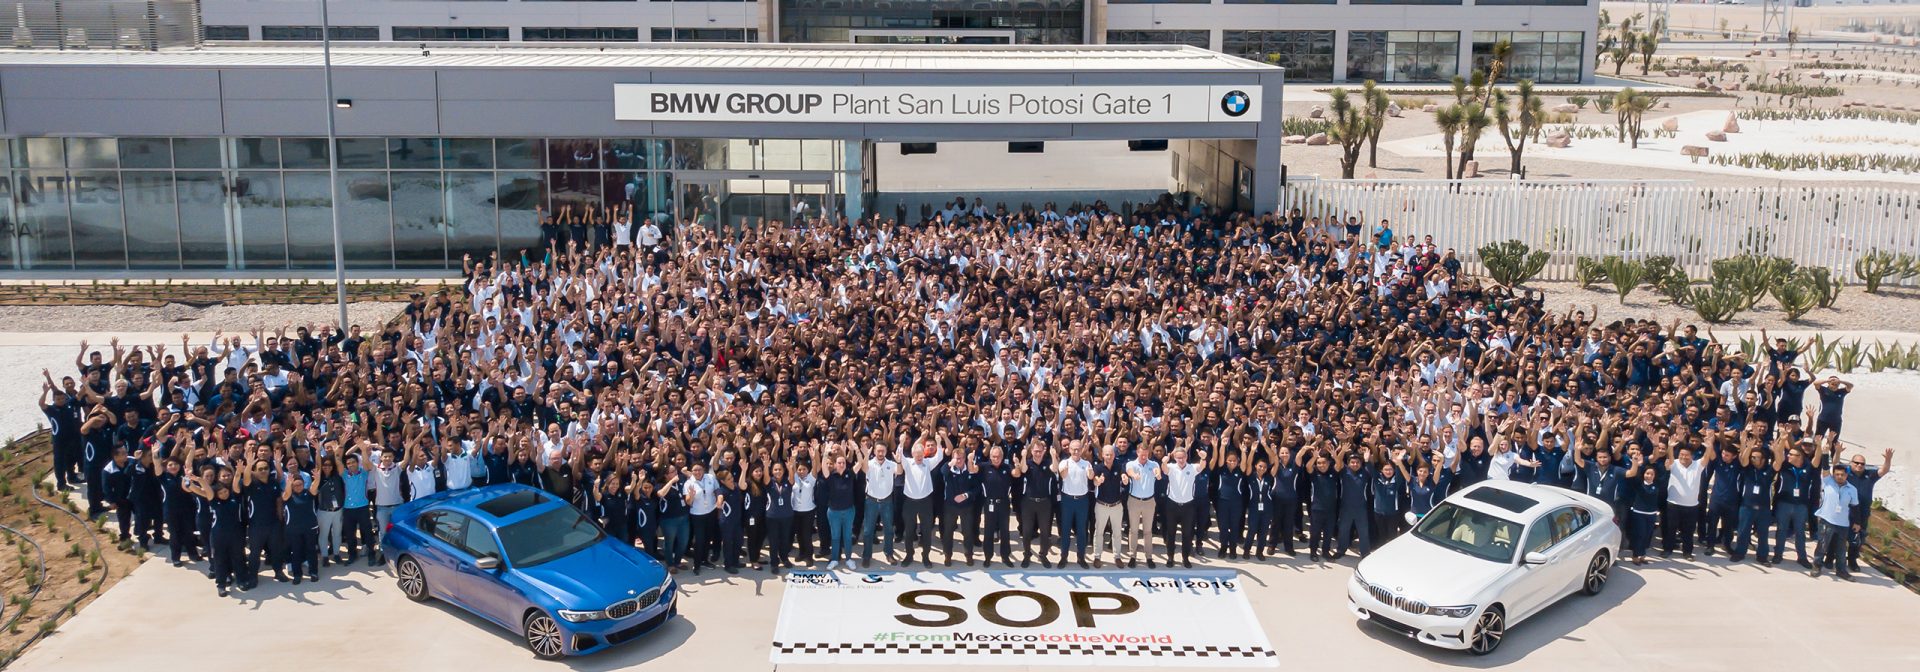 Employees of the new plant in front of Gate 1